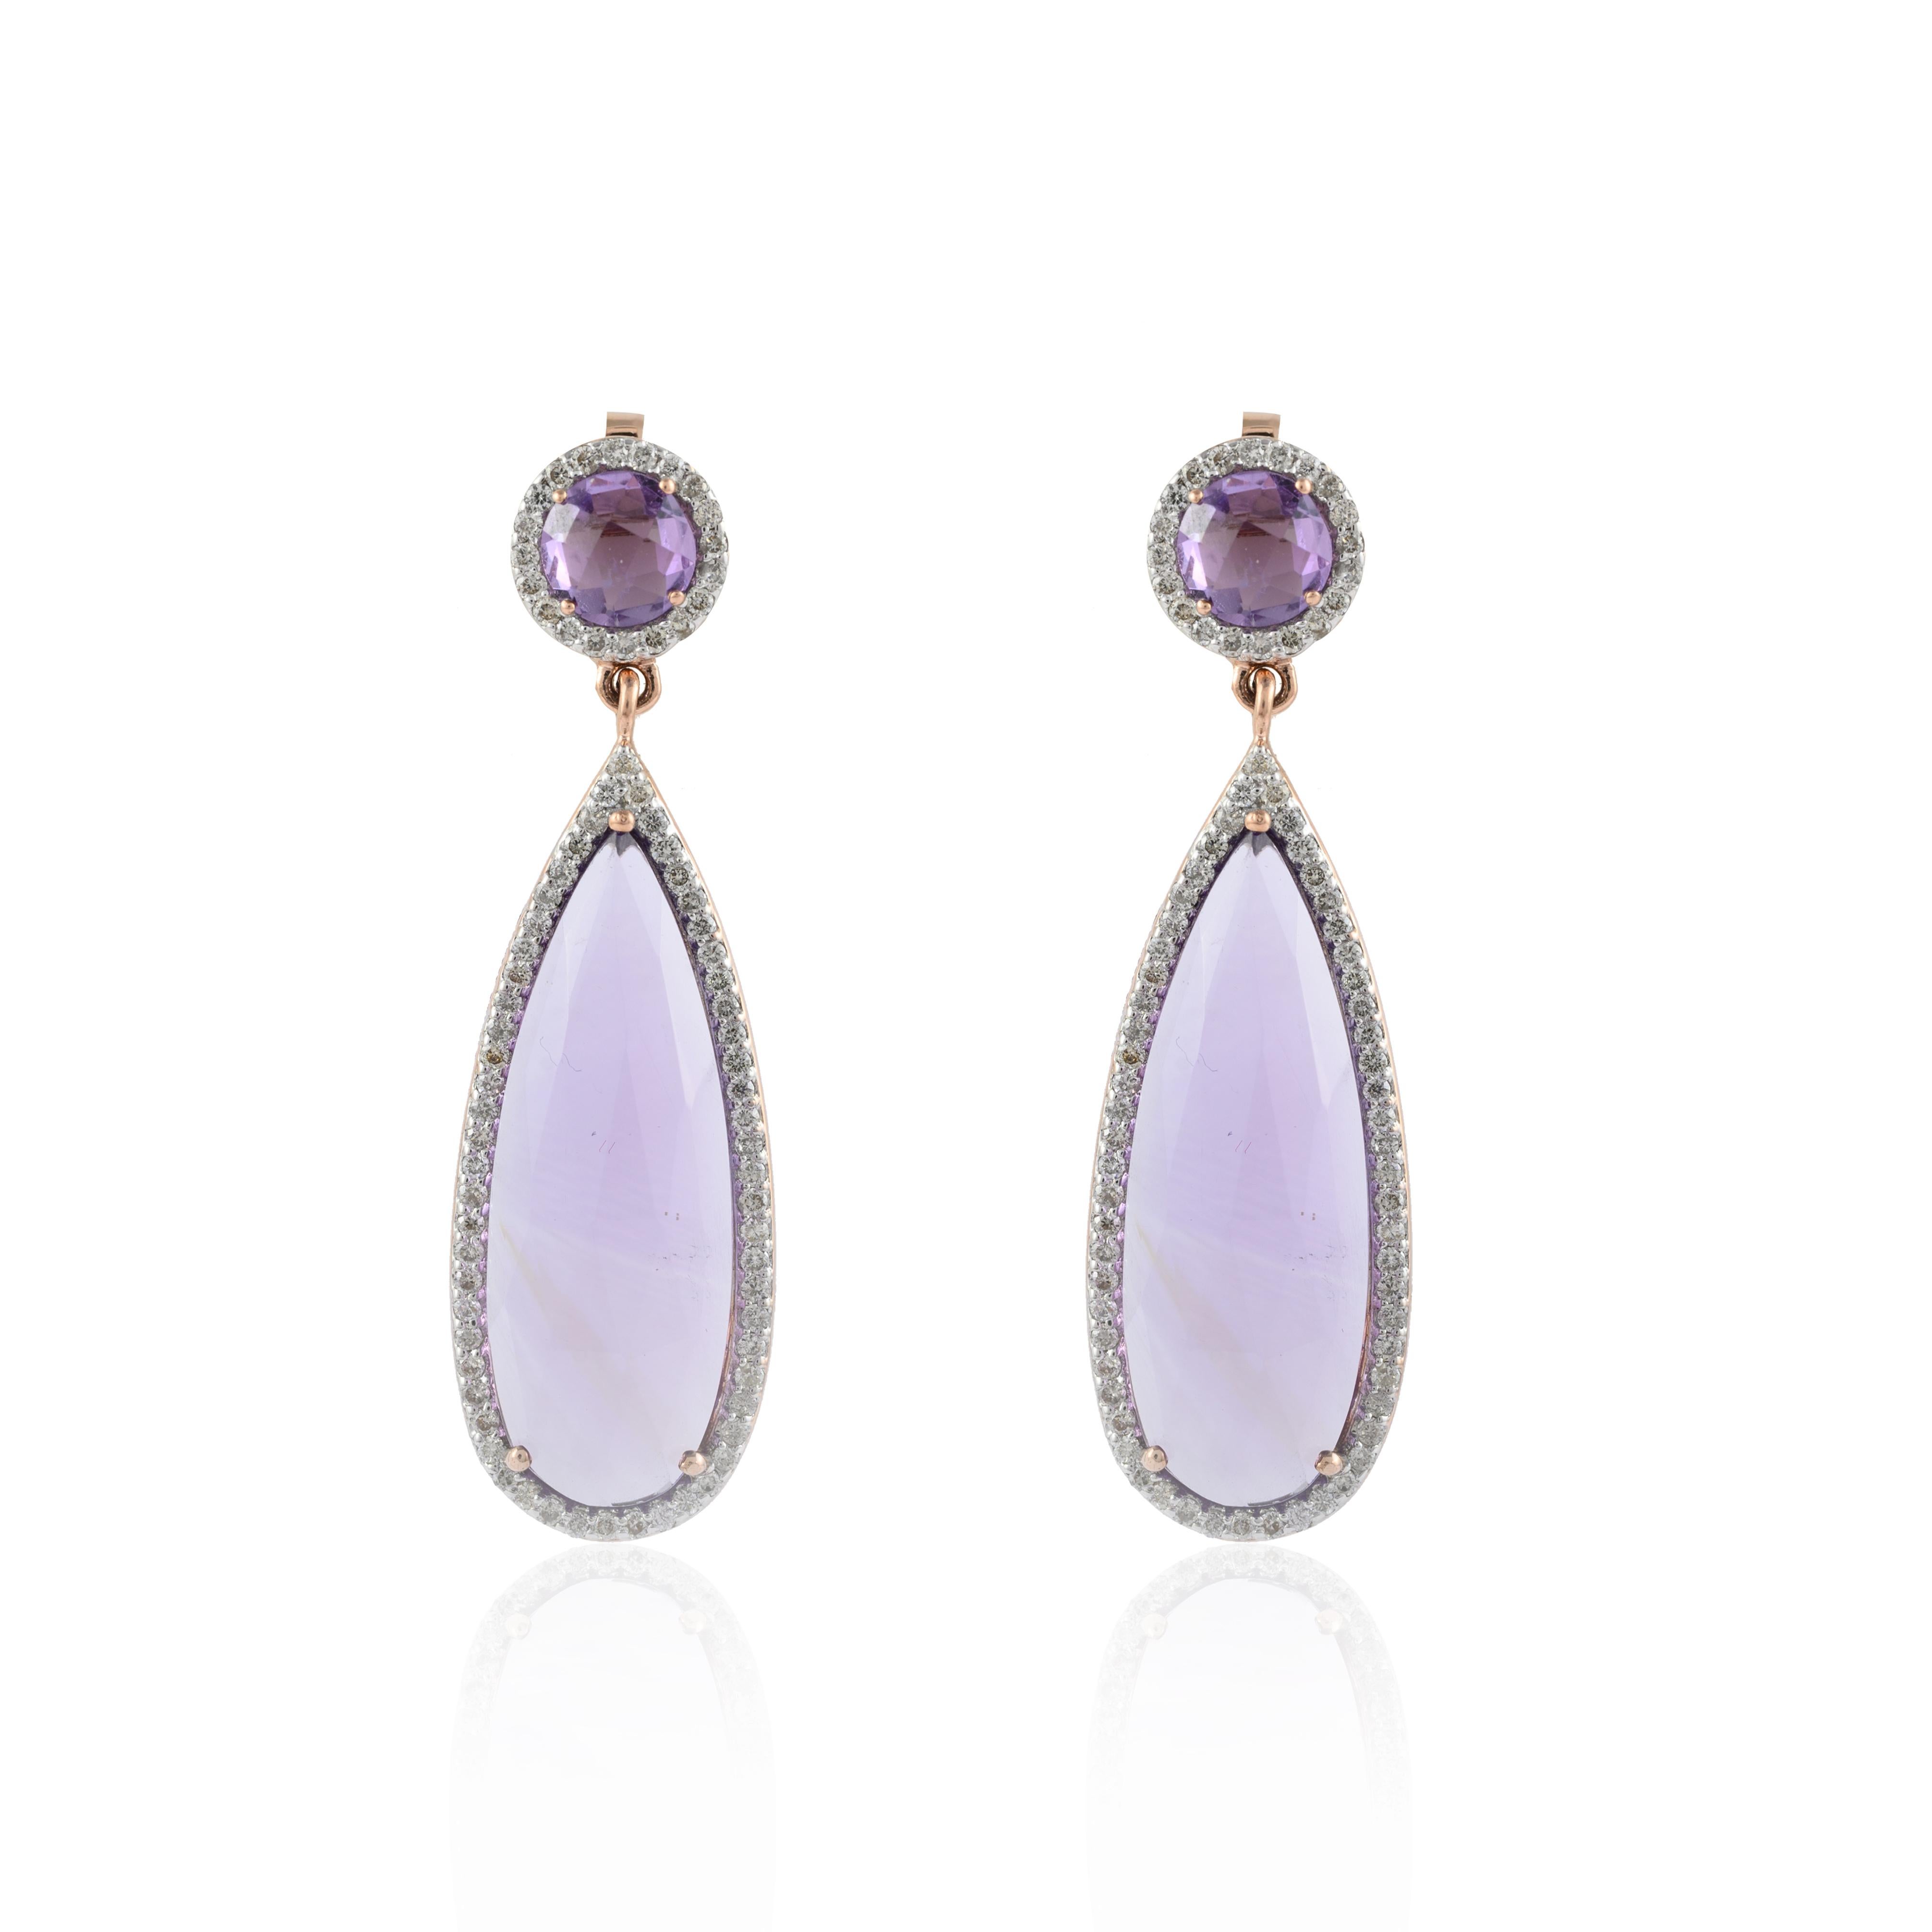 Diamond Amethyst Dangle Drop Earrings in 14K gold to make a statement with your look. These earrings create a sparkling, luxurious look featuring pear and round cut amethyst.
Amethyst has a highly calming energy wearing this gem provides